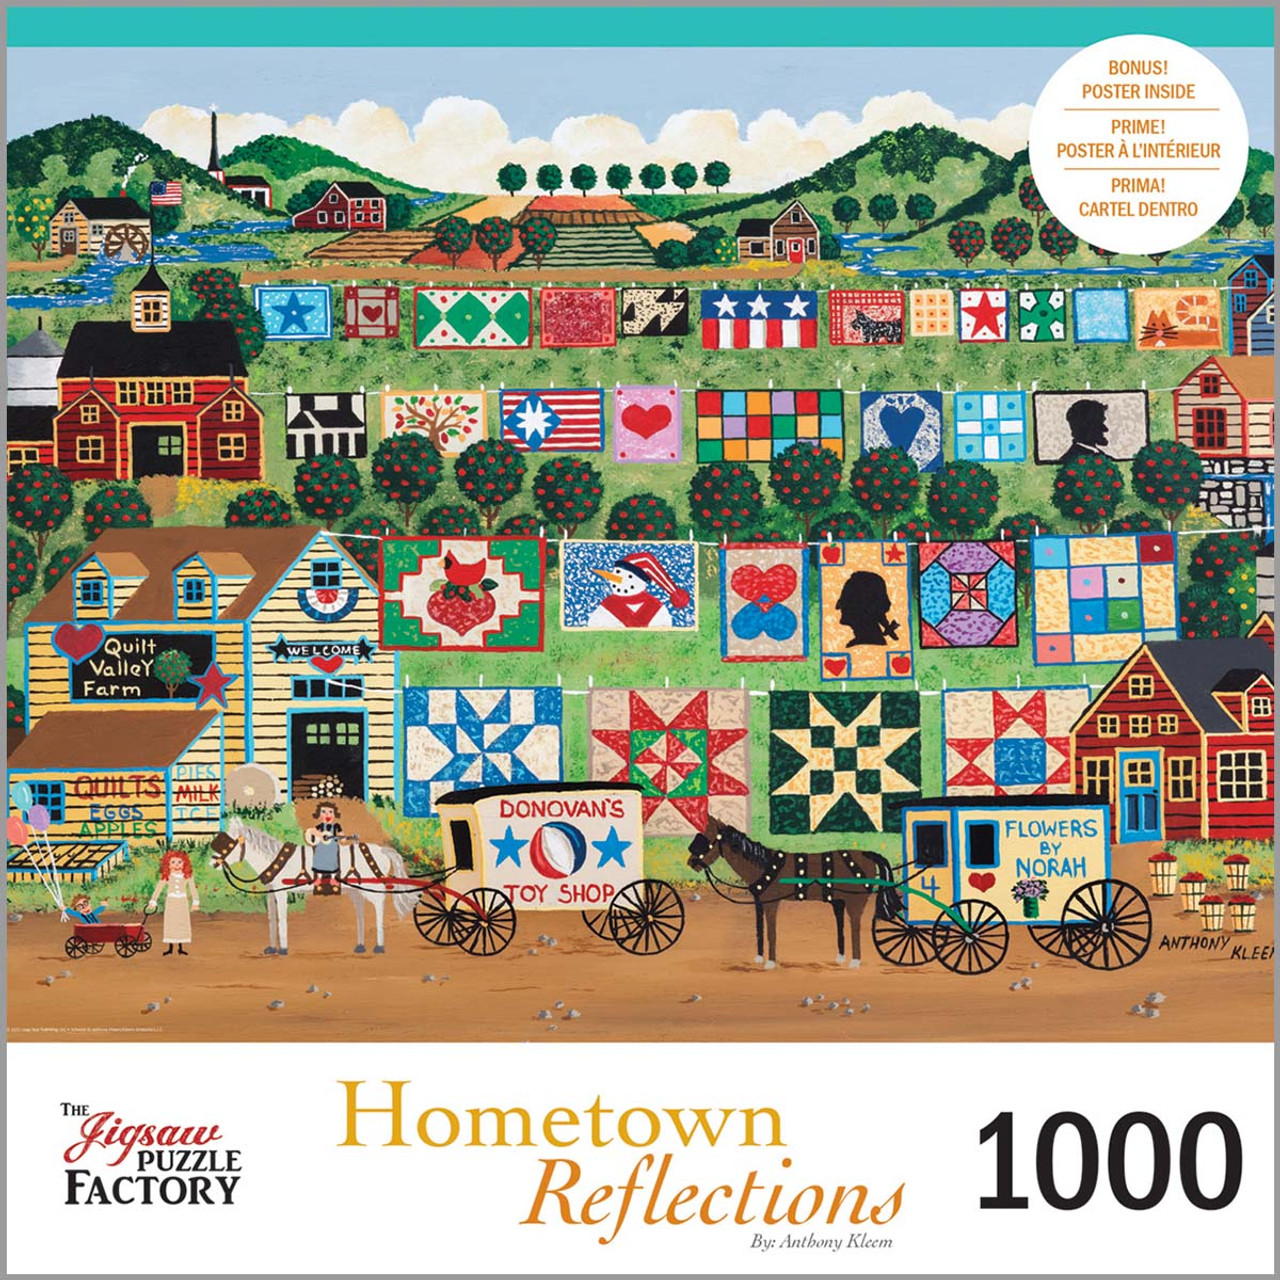 Patches of Fun 1000-Piece Puzzle – Willow Creek Press